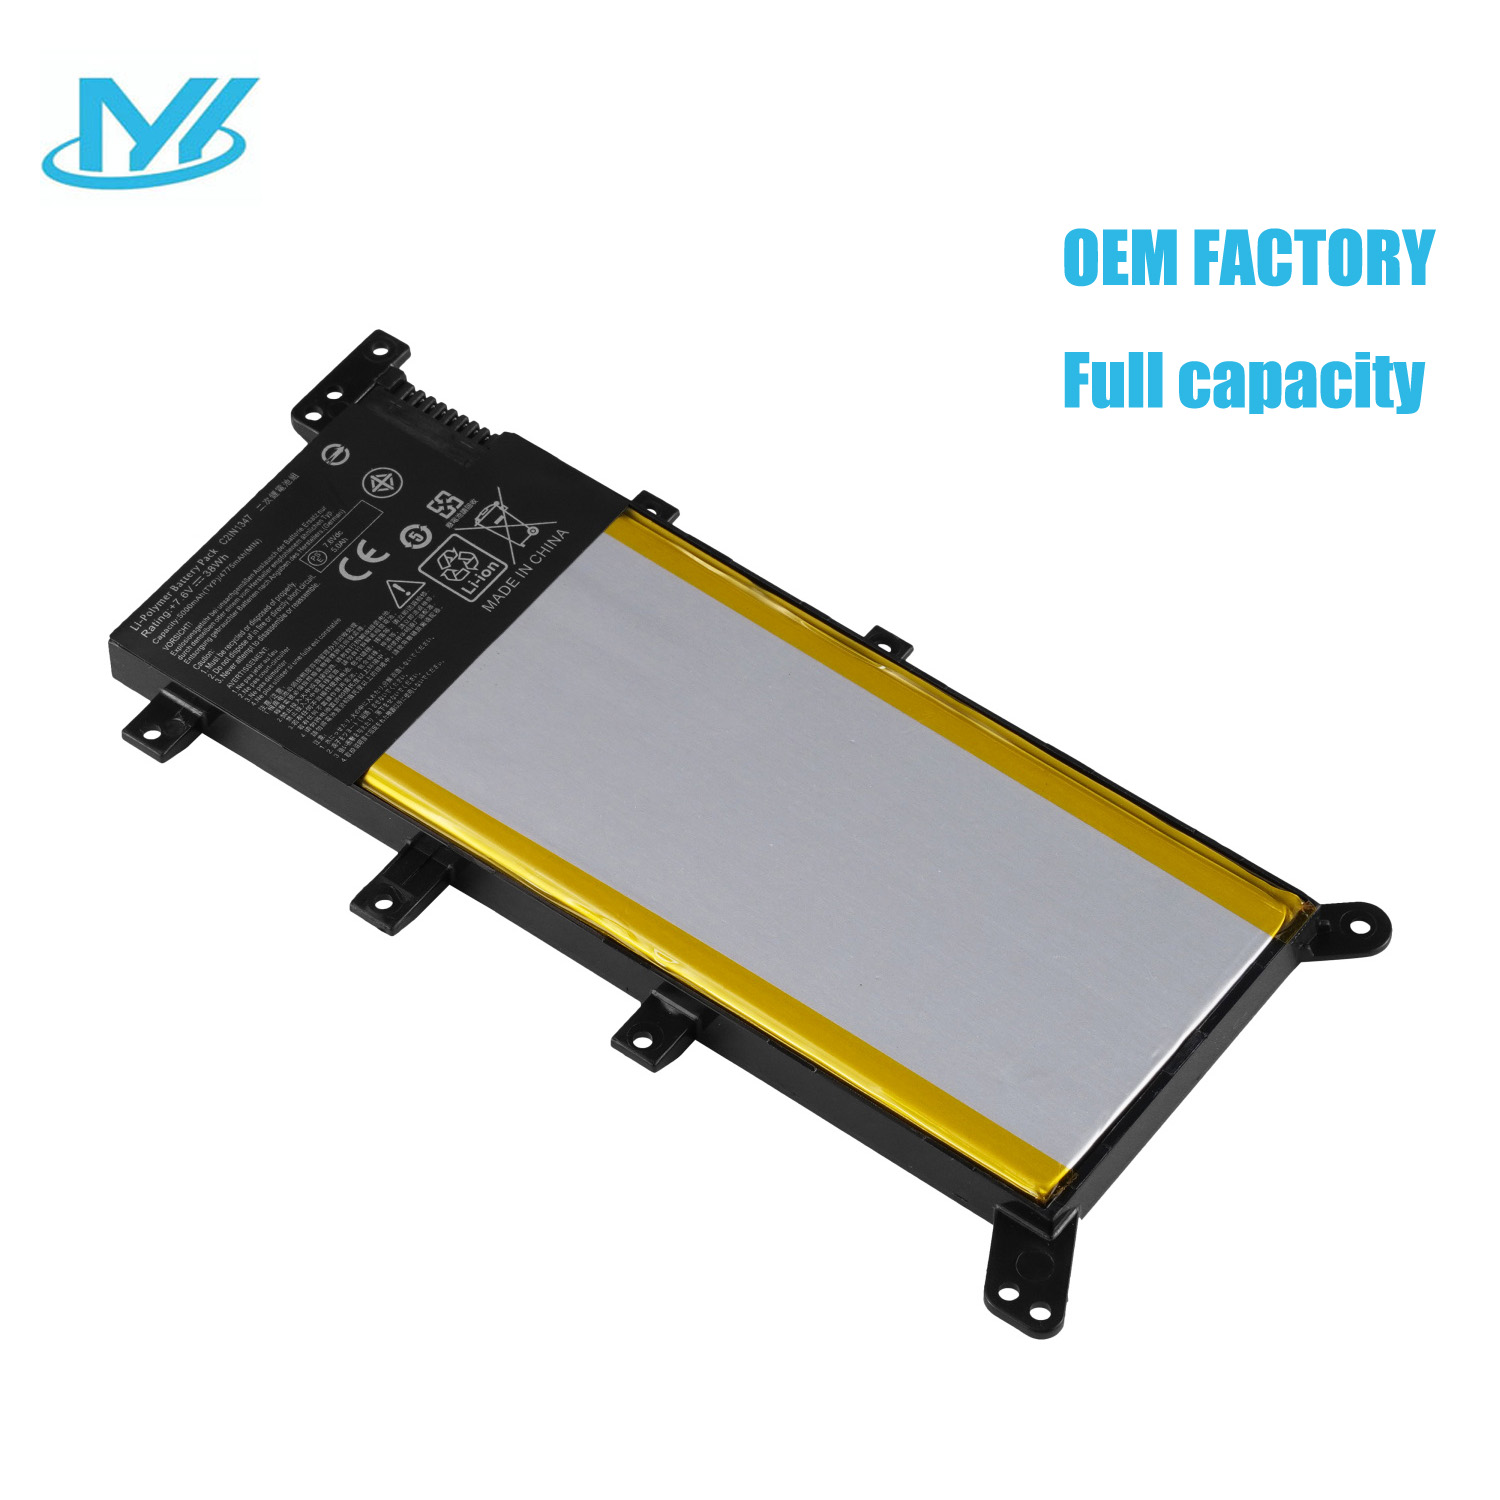 C21N1347 Laptop Battery notebook battery for Asus X555 X555LA X555LD X555LN A555L K555L Y583LD W519LD K555LD K555LA R556L VM590L